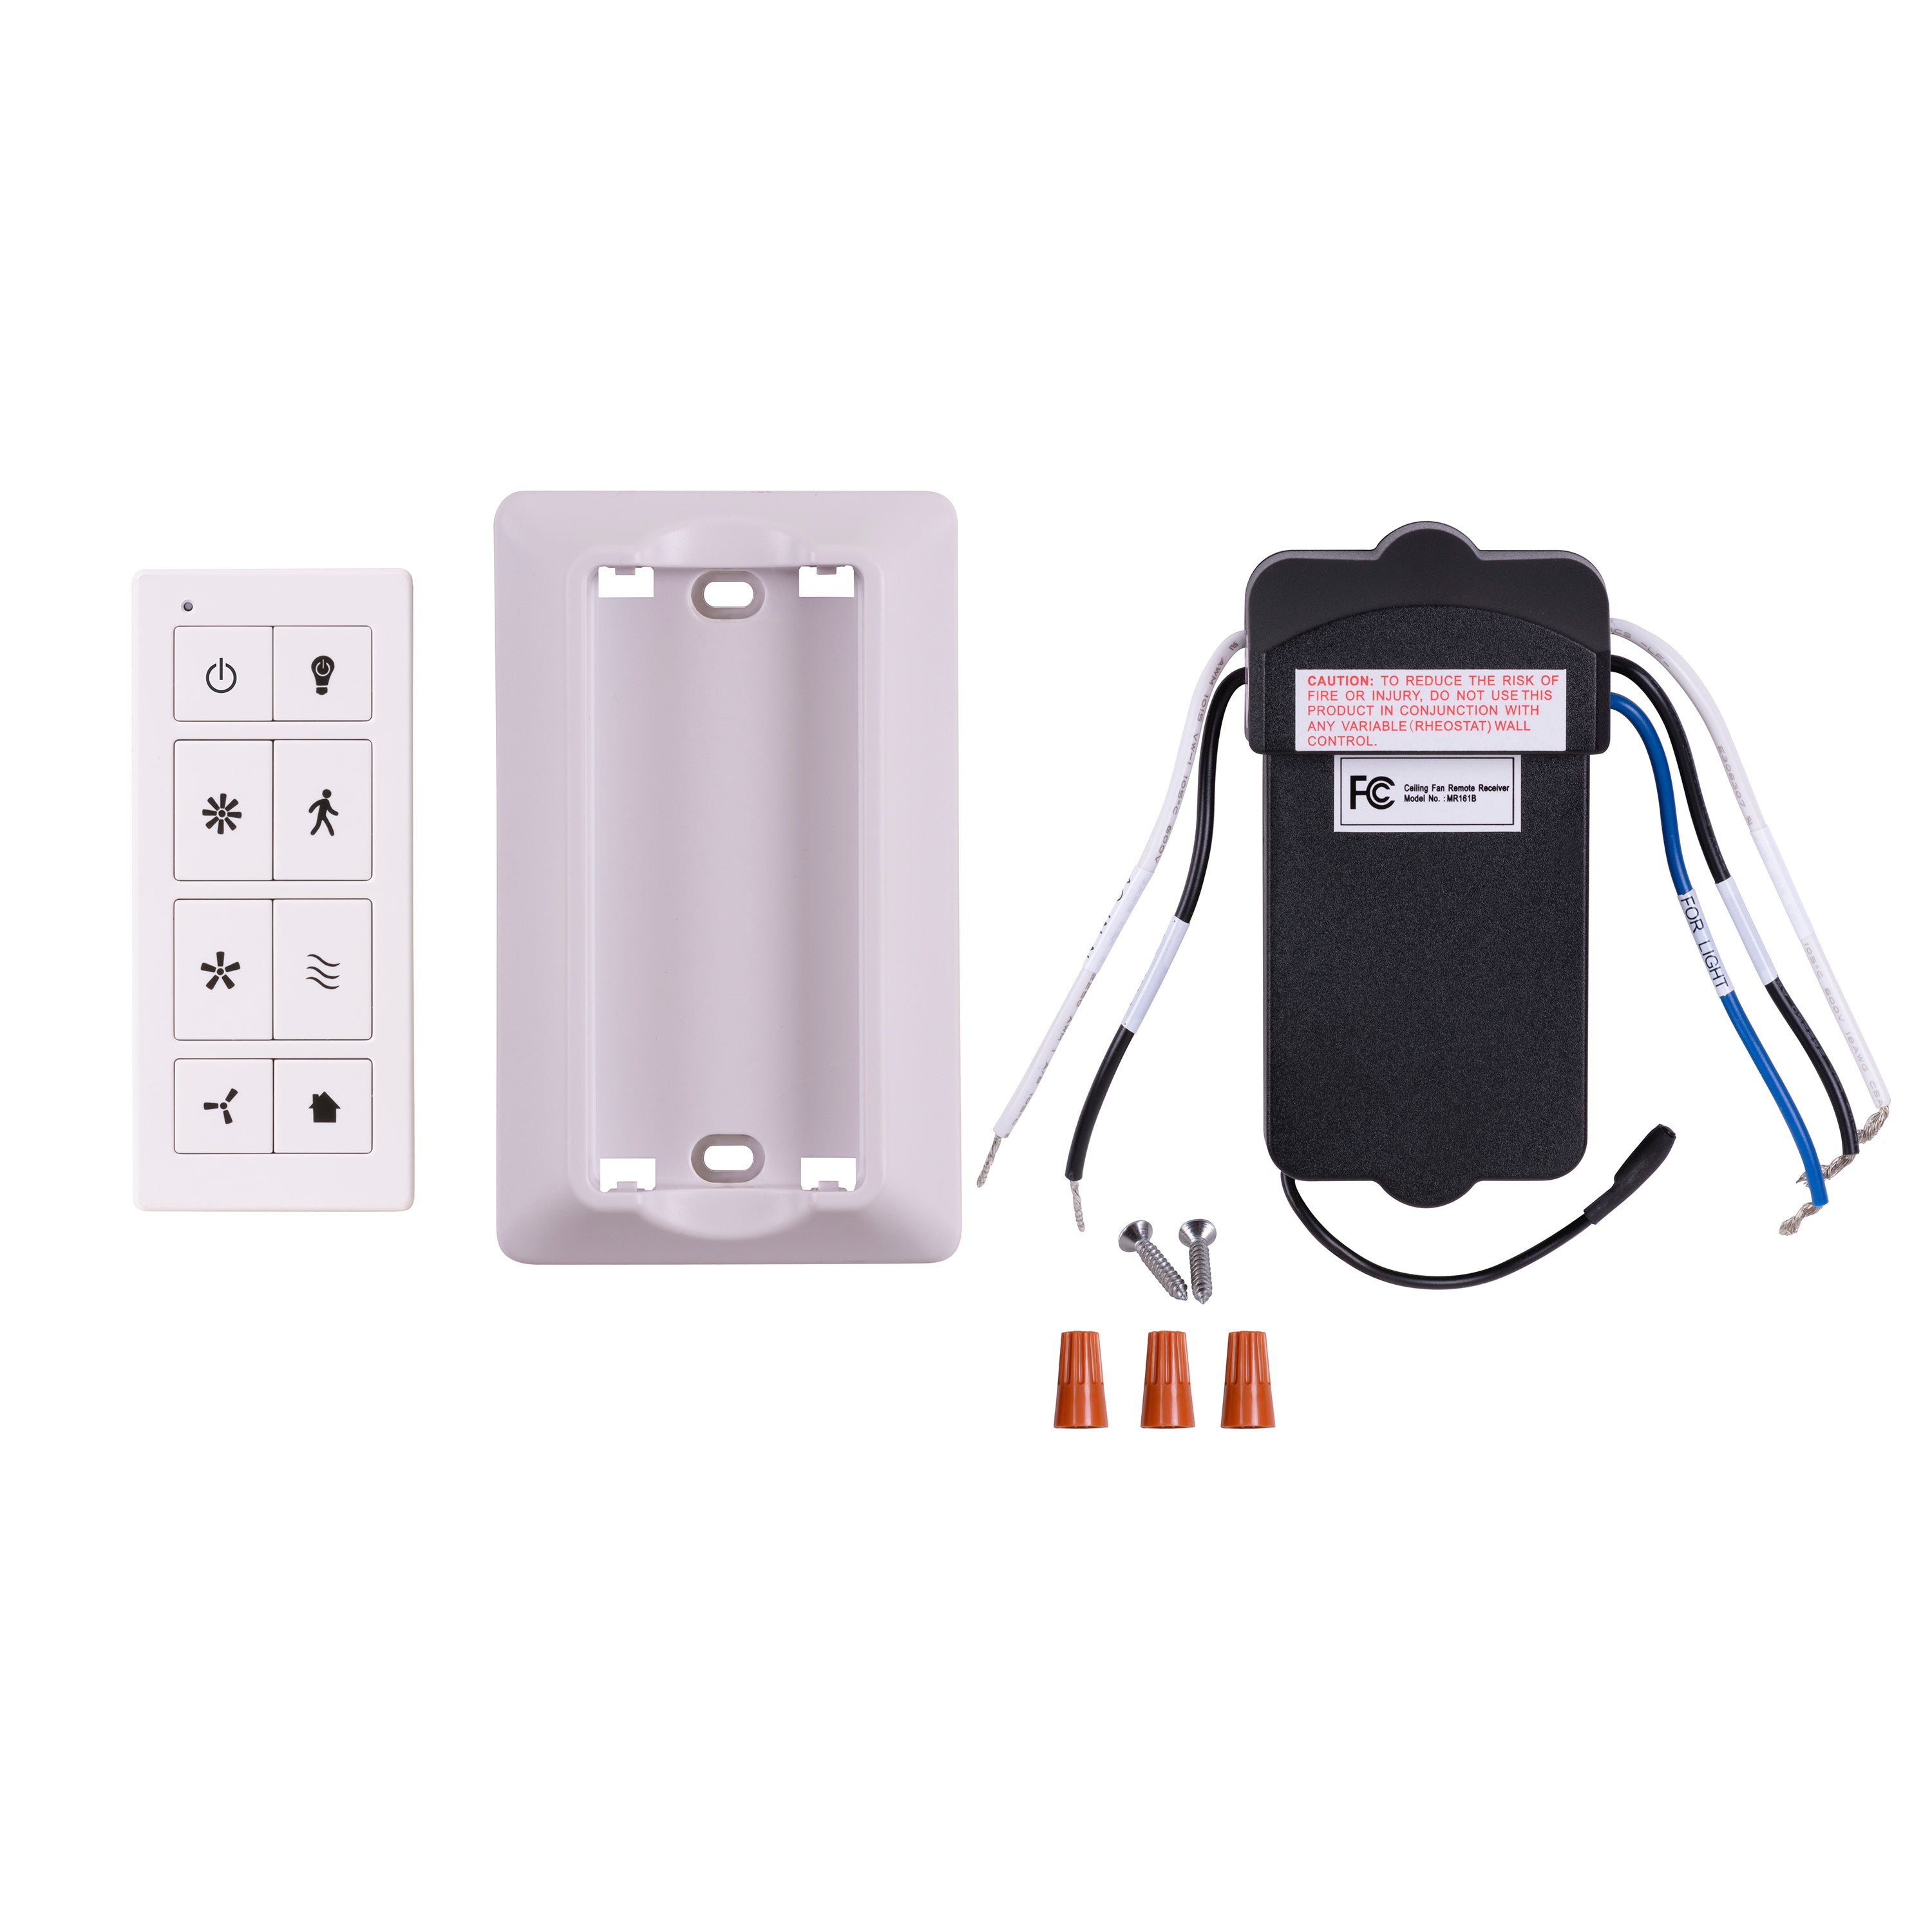 Remote Control Outlet Switch UNDER $10 - Lights, Fans & more! 